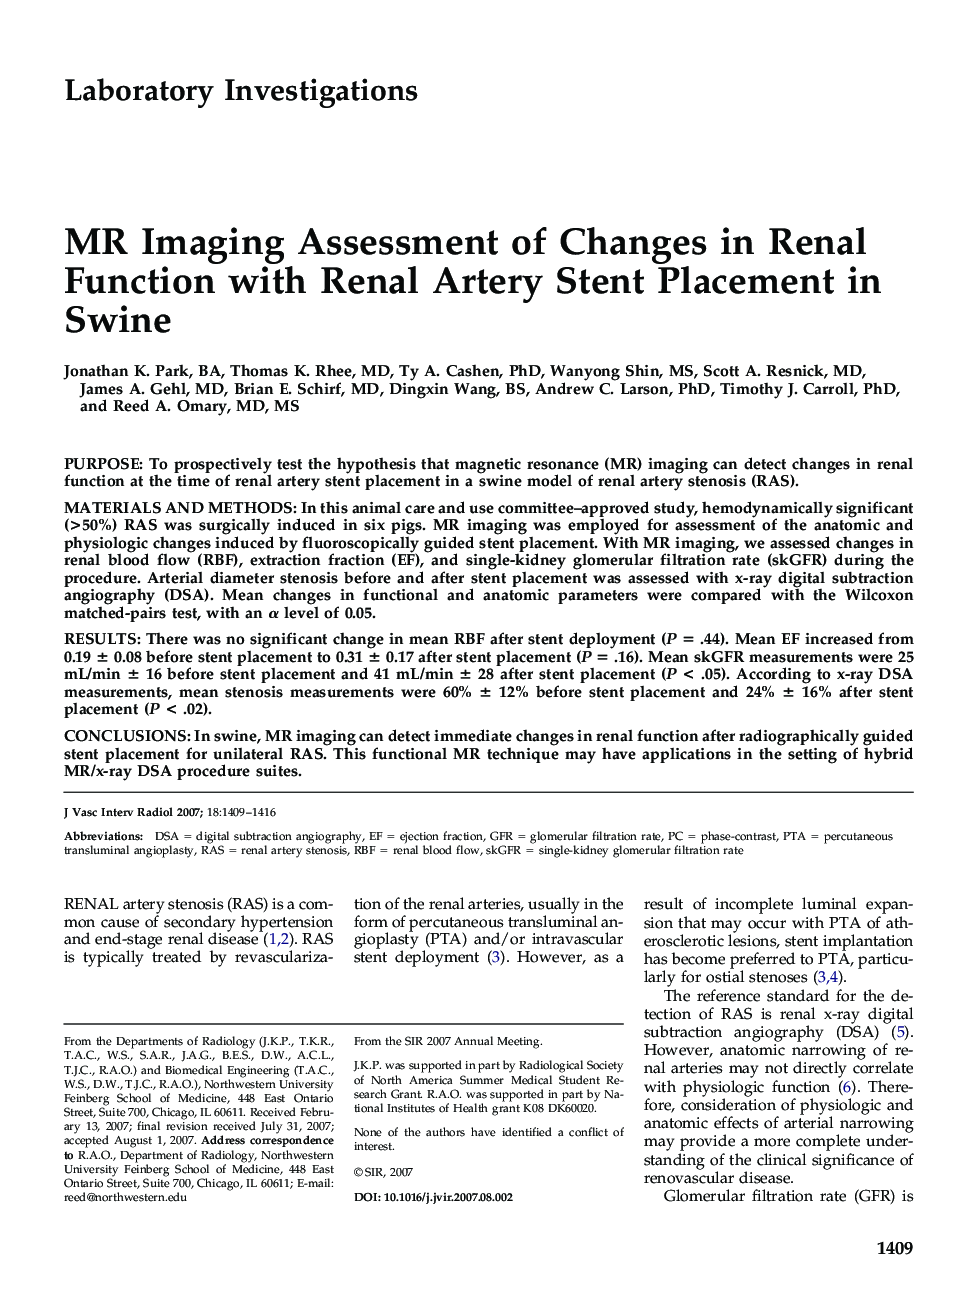 MR Imaging Assessment of Changes in Renal Function with Renal Artery Stent Placement in Swine